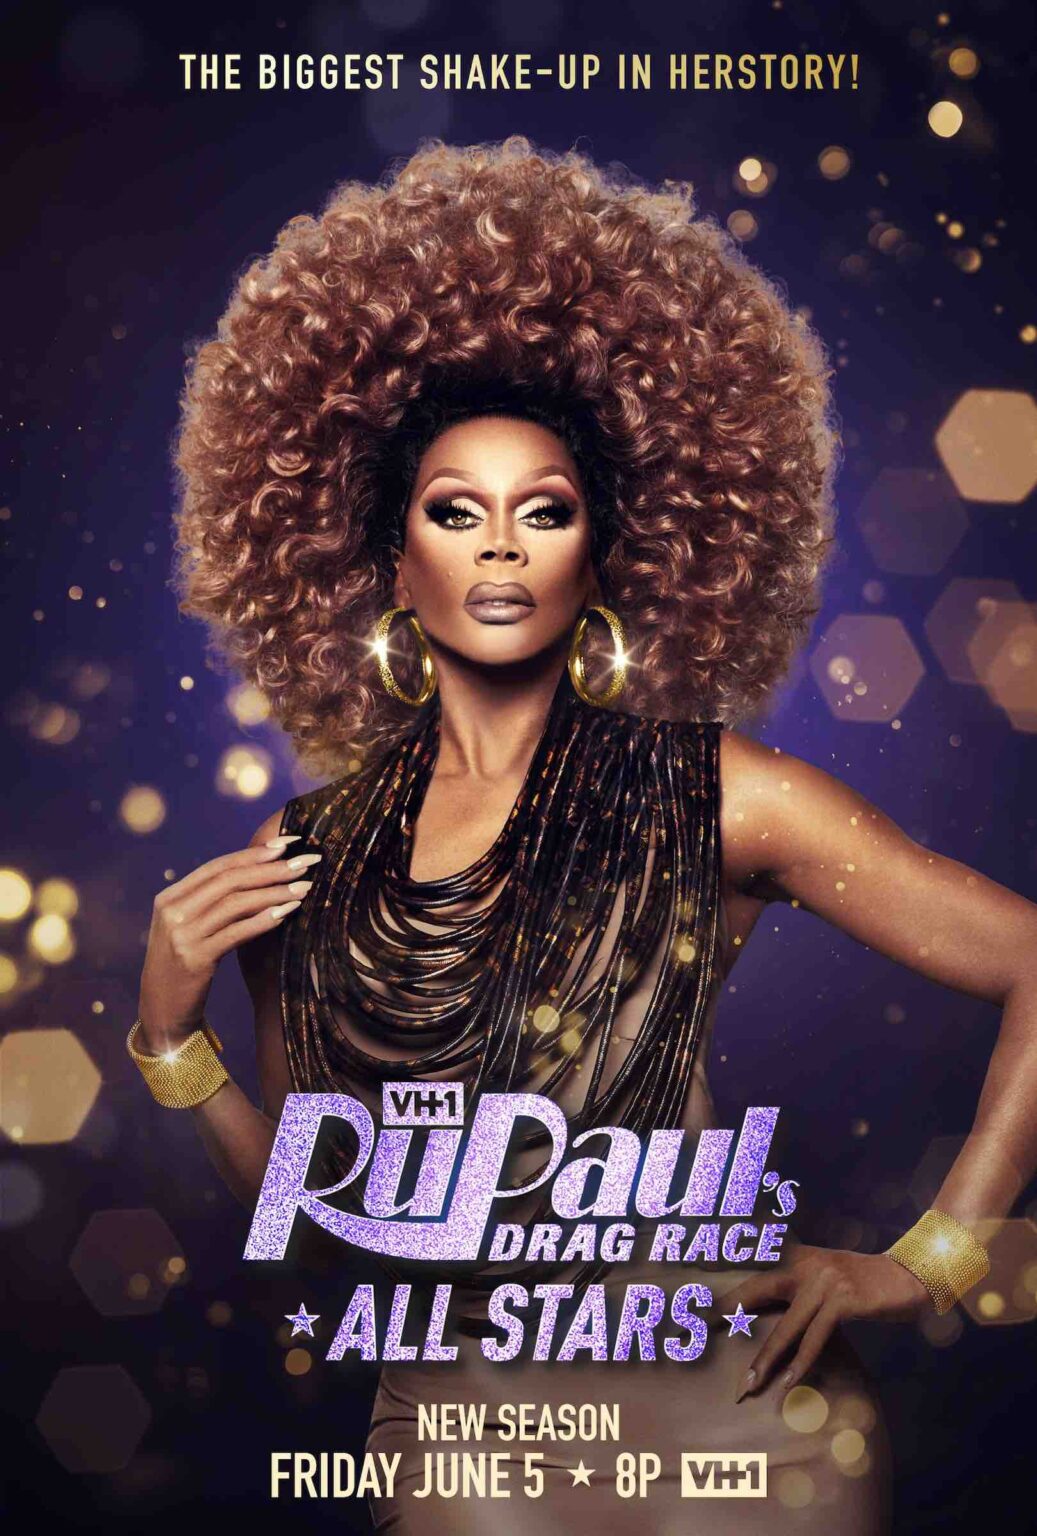 'Rupaul’s Drag Race All Stars' season 5 is premiering on VH1 on June 5th, and we cannot wait to see redemption for these queens.